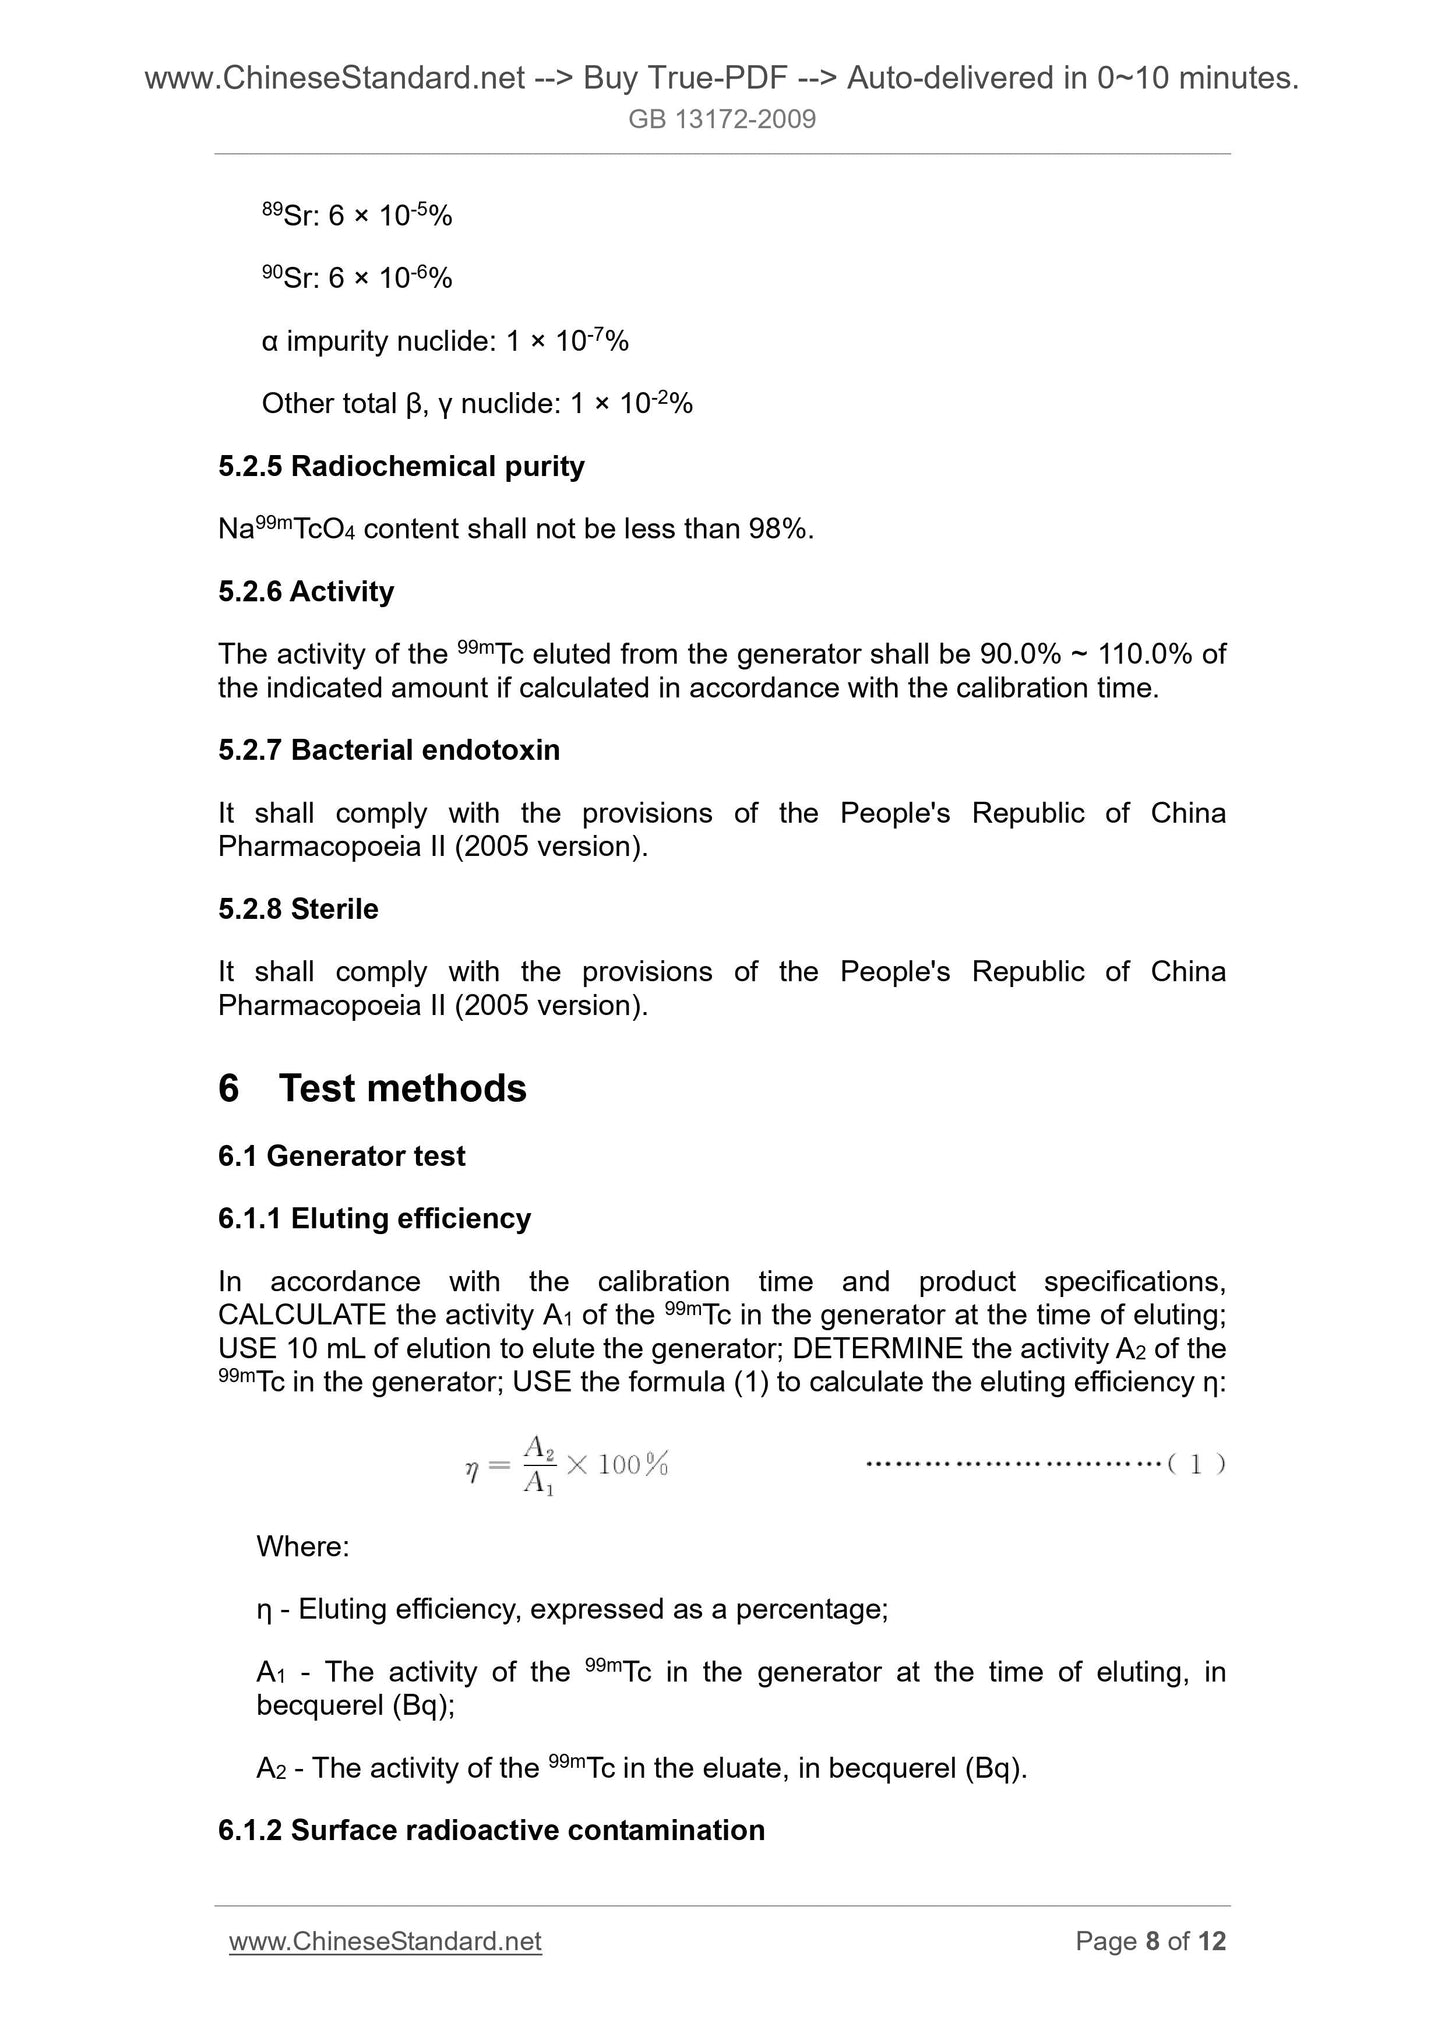 GB 13172-2009 Page 5